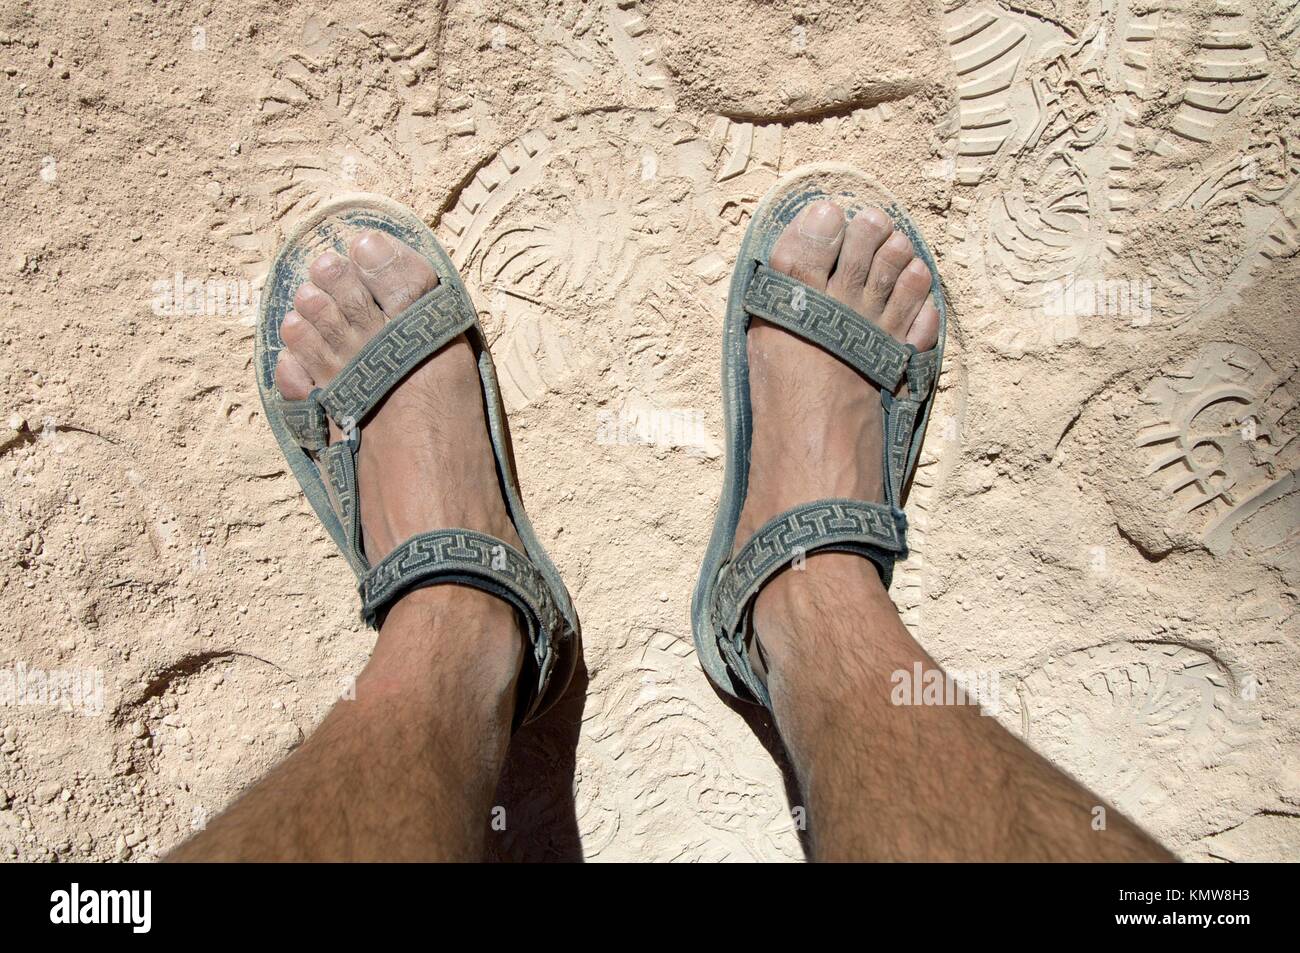 hat Banquet Tyranny feet in sandals in the desert Stock Photo - Alamy